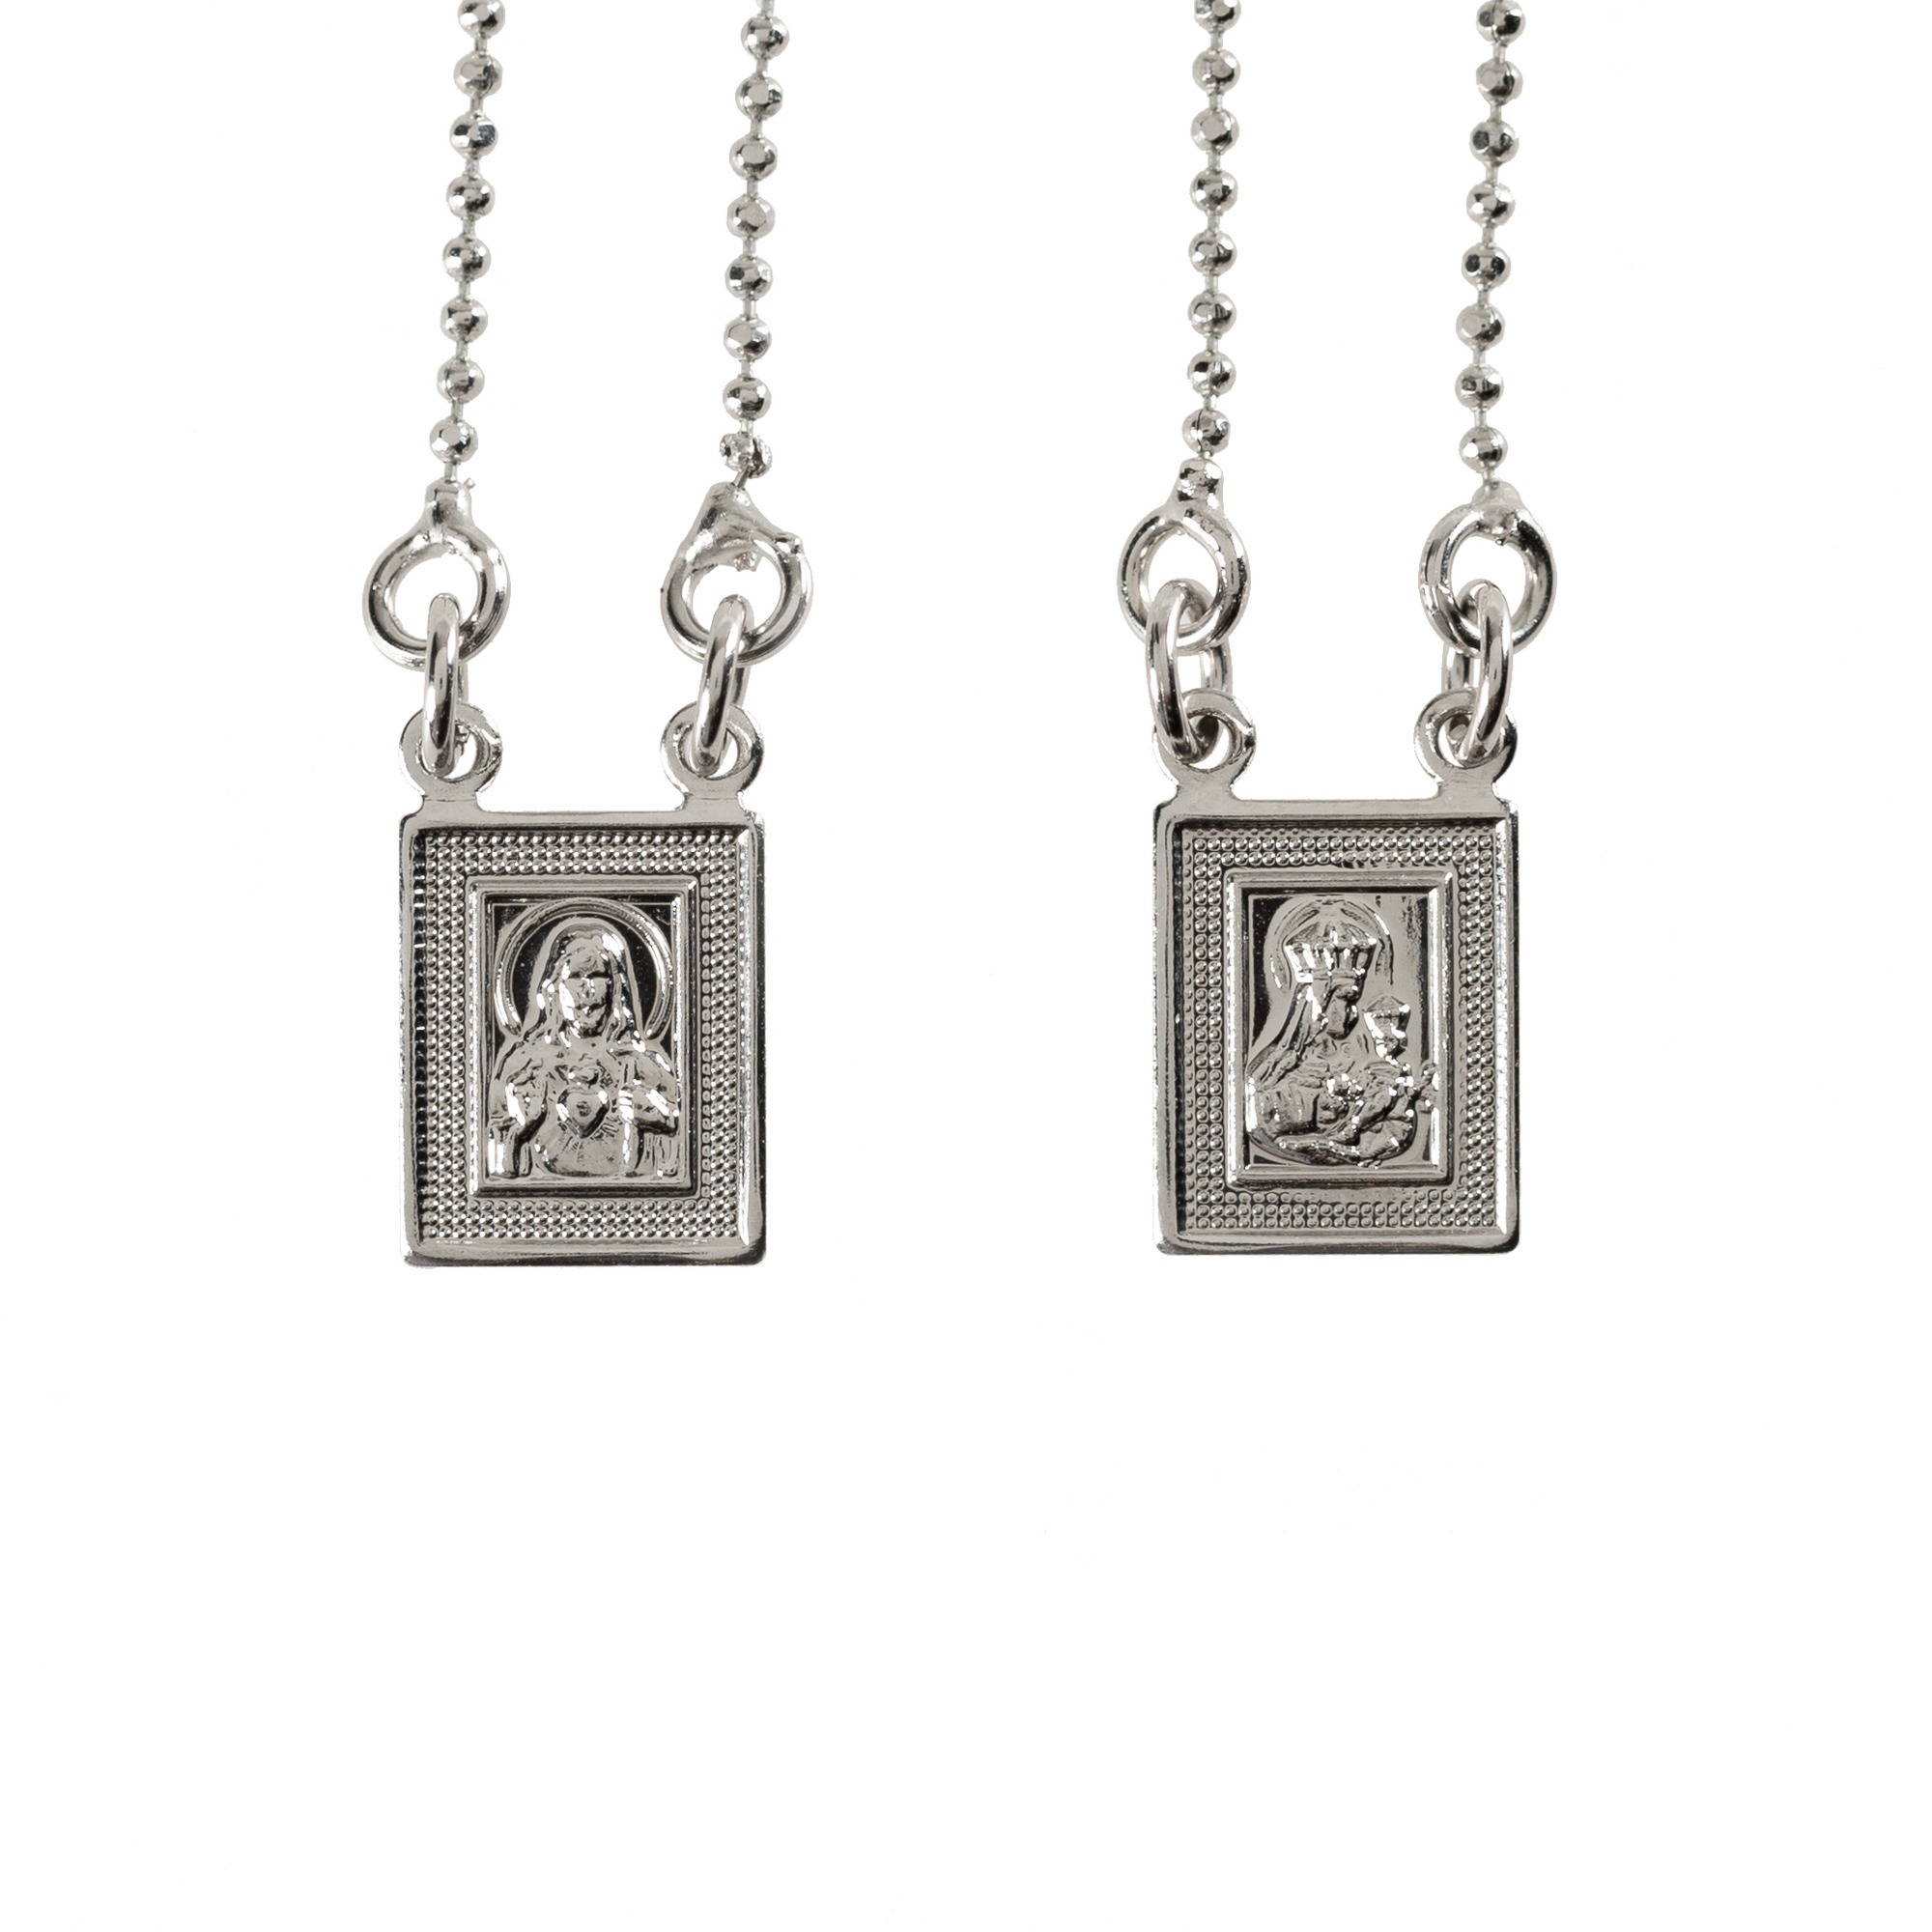 Silver-Plated Brass Scapular Necklace | The Catholic Company®